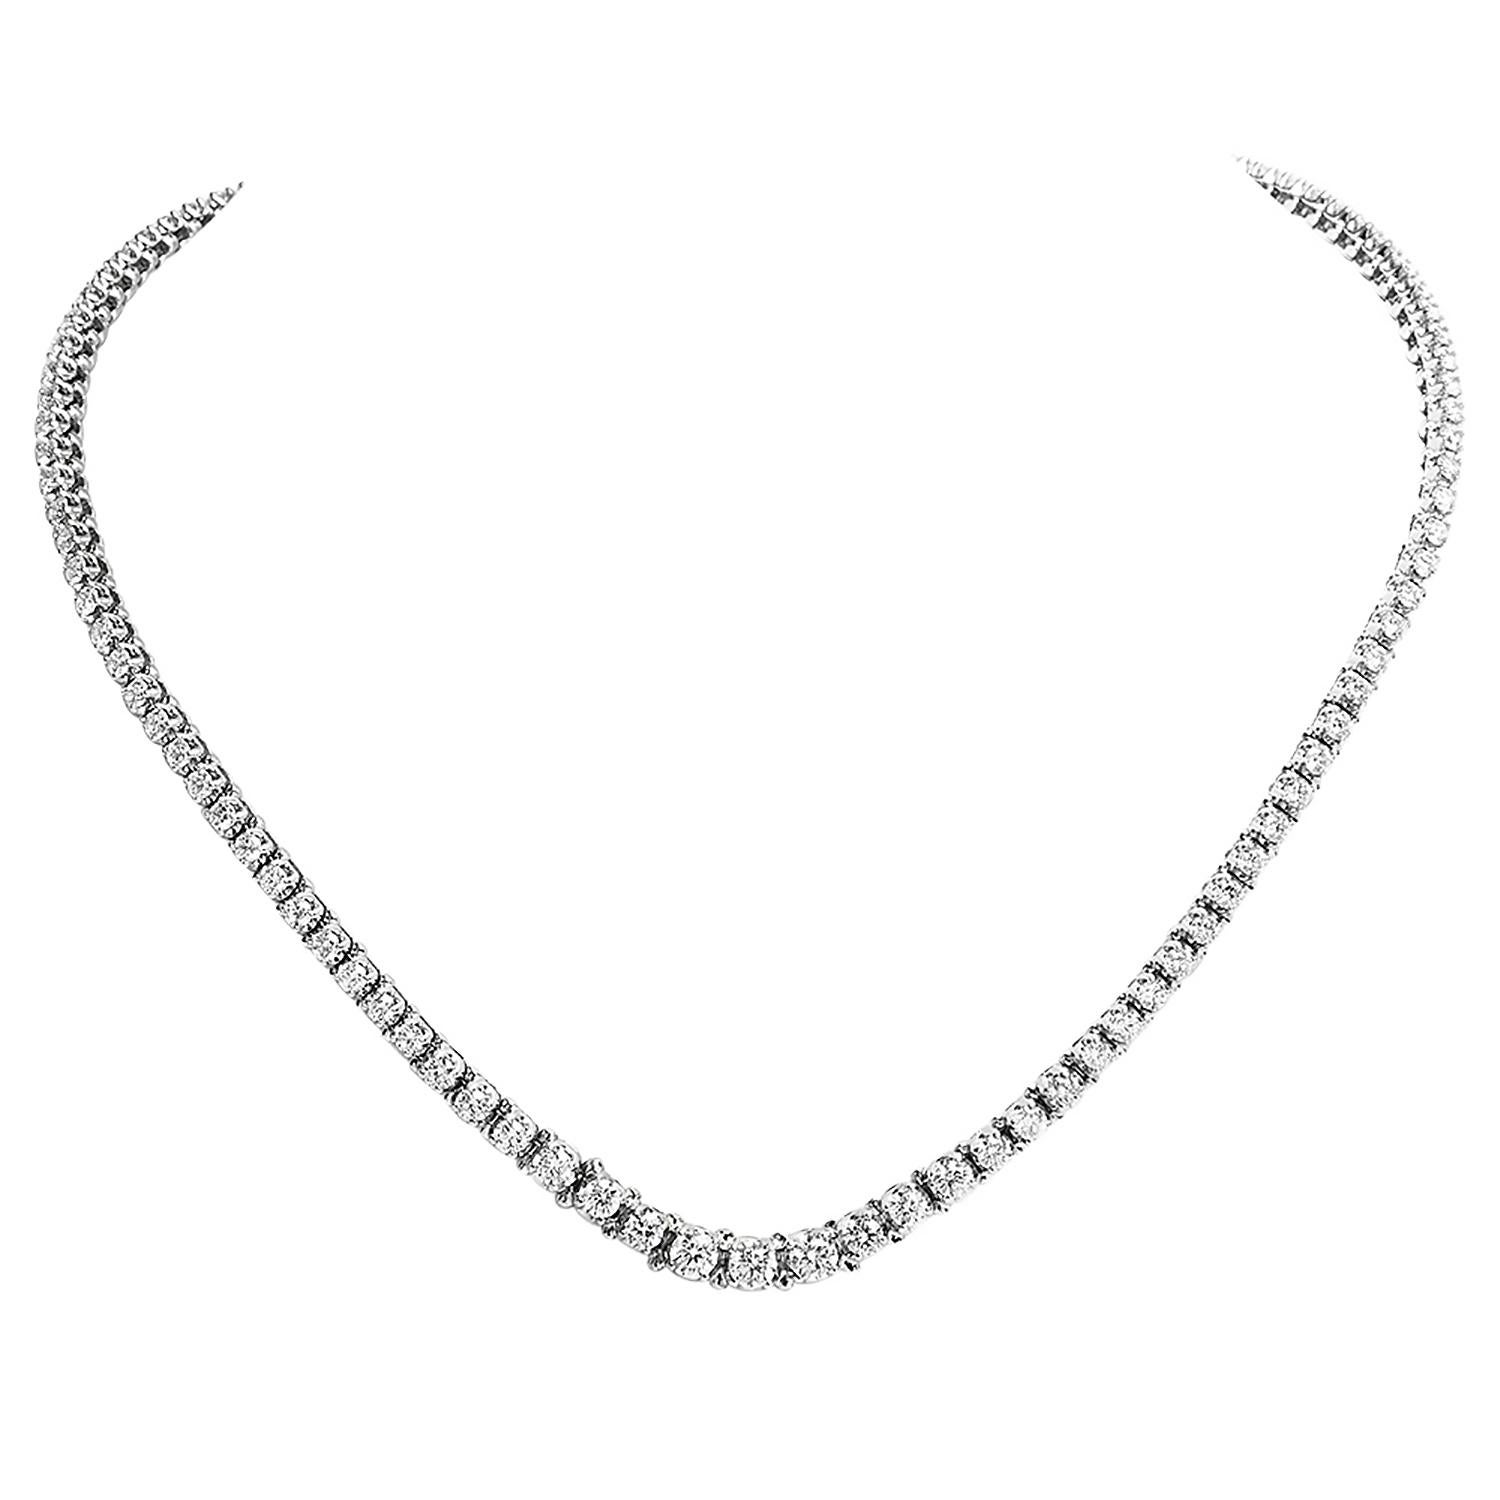 The Riviera necklace boasts  96 round-cut brilliant diamond bezels set in 14k white gold. A stunning gift that's sure to delight for years to come.

Set with (96) Round-cut Diamonds, weighing approx. 8.15 carats, G-H Color, VS clarity.

Weighs